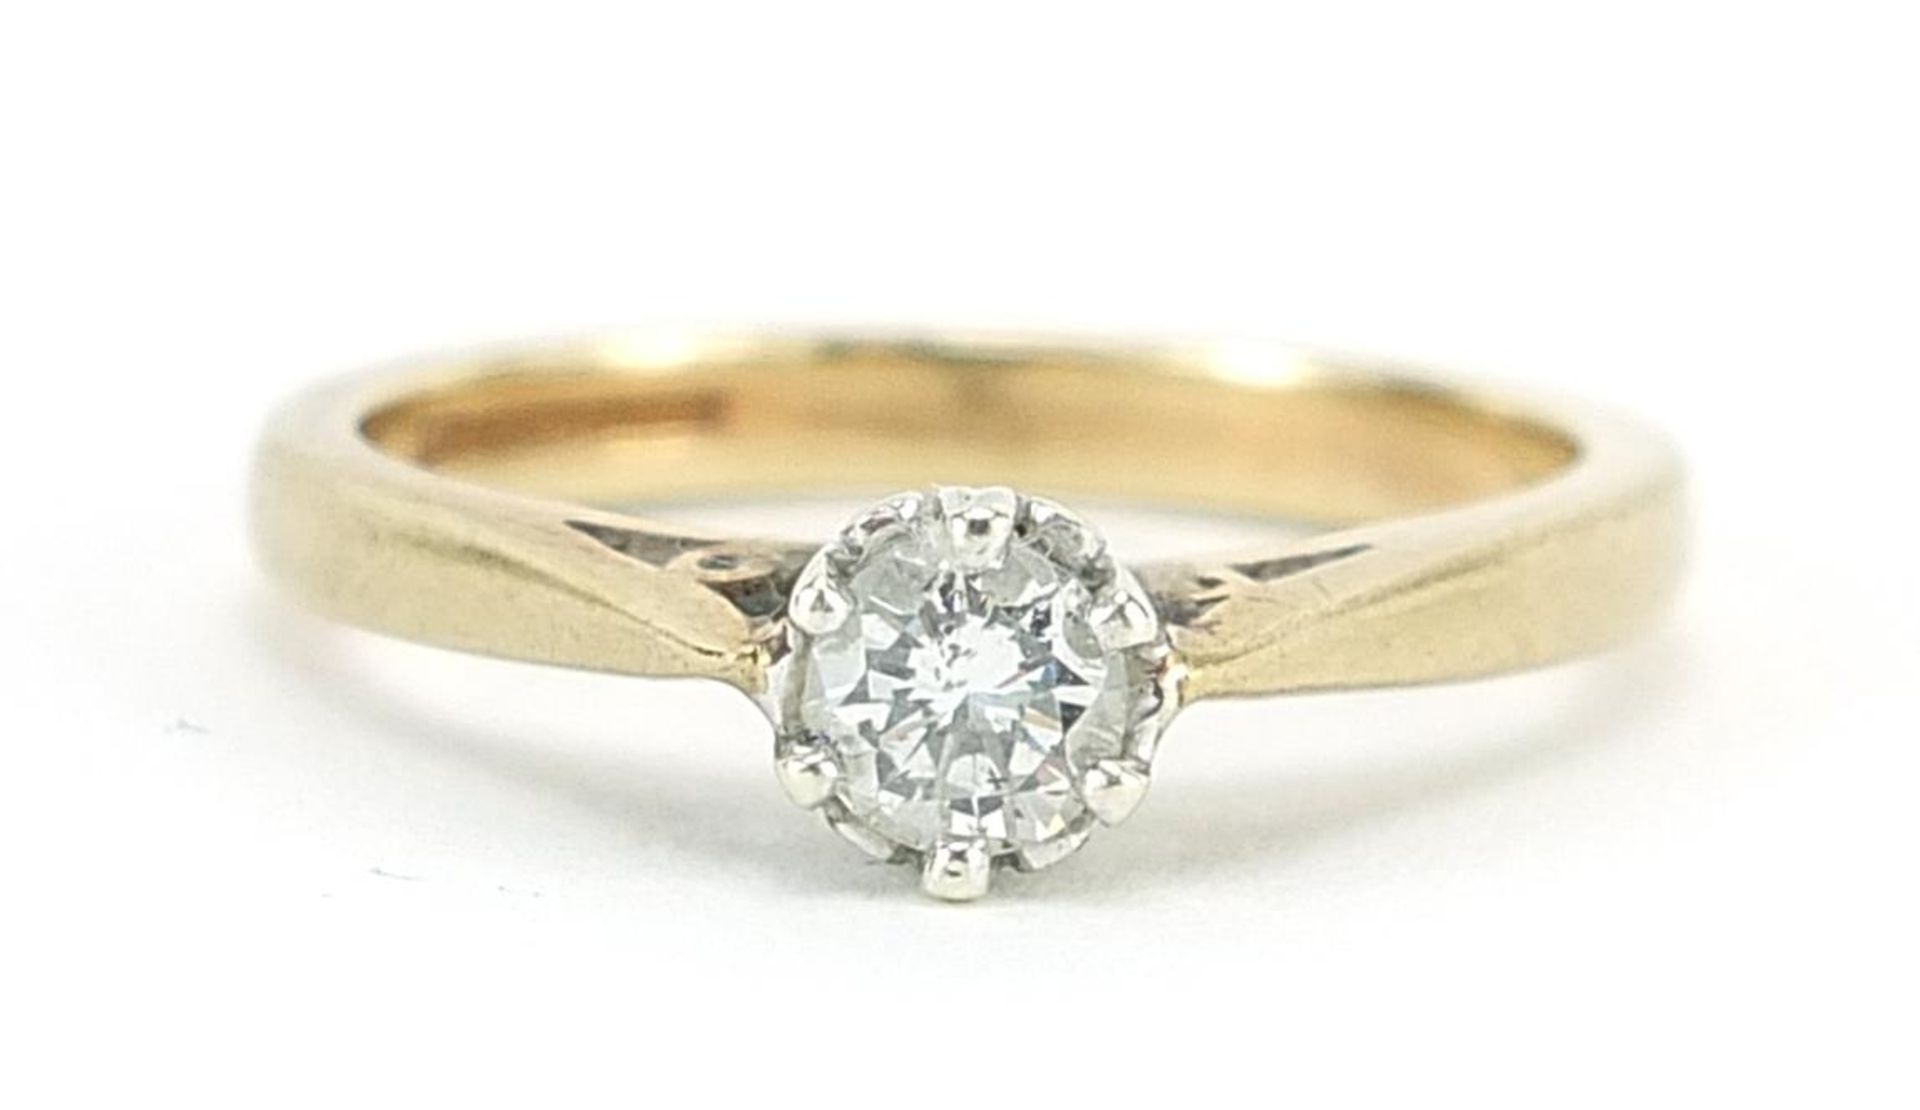 9ct gold diamond solitaire ring, approximately 0.25 carat, size L/M, 2.6g